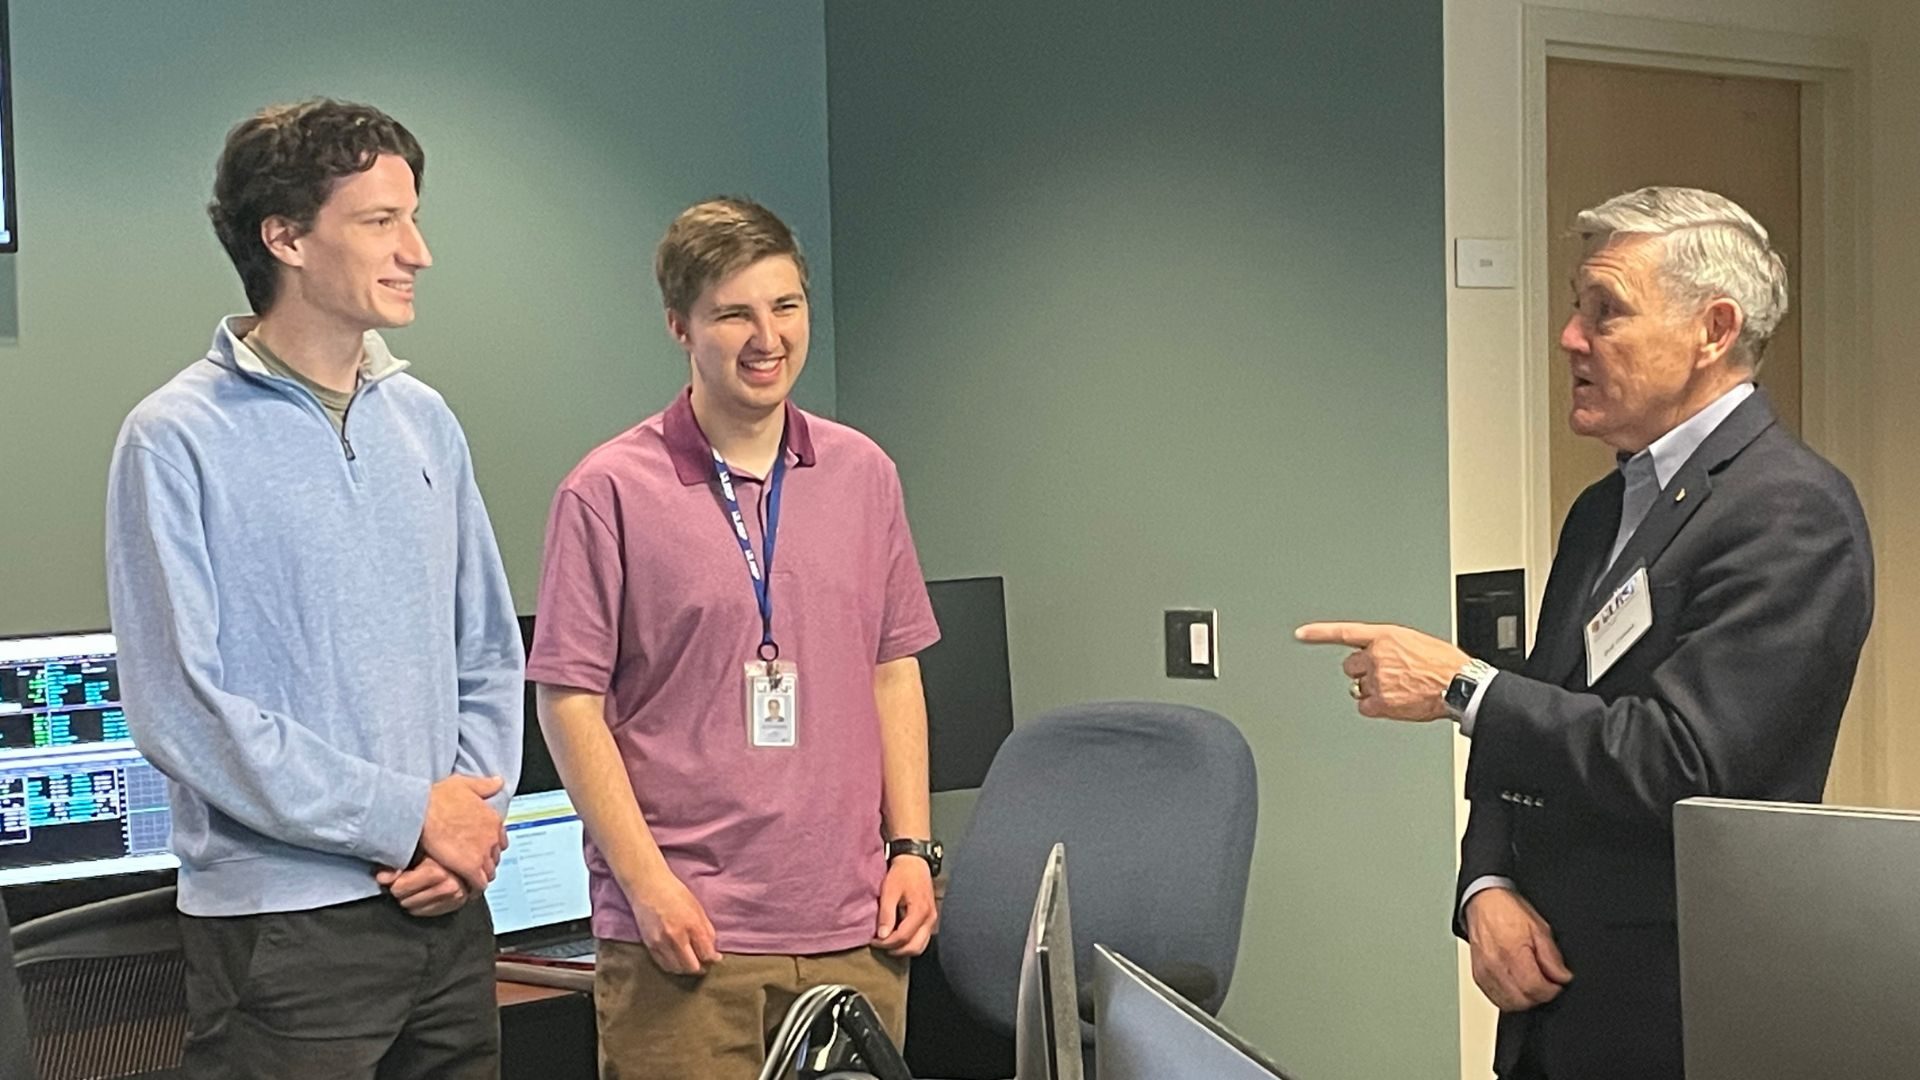 NASA Associate Administrator Bob Cabana (right) meets with undergraduate flight controllers Alex Pichler (left) and Alex Fix (center) in the LASP Mission Operations Center.